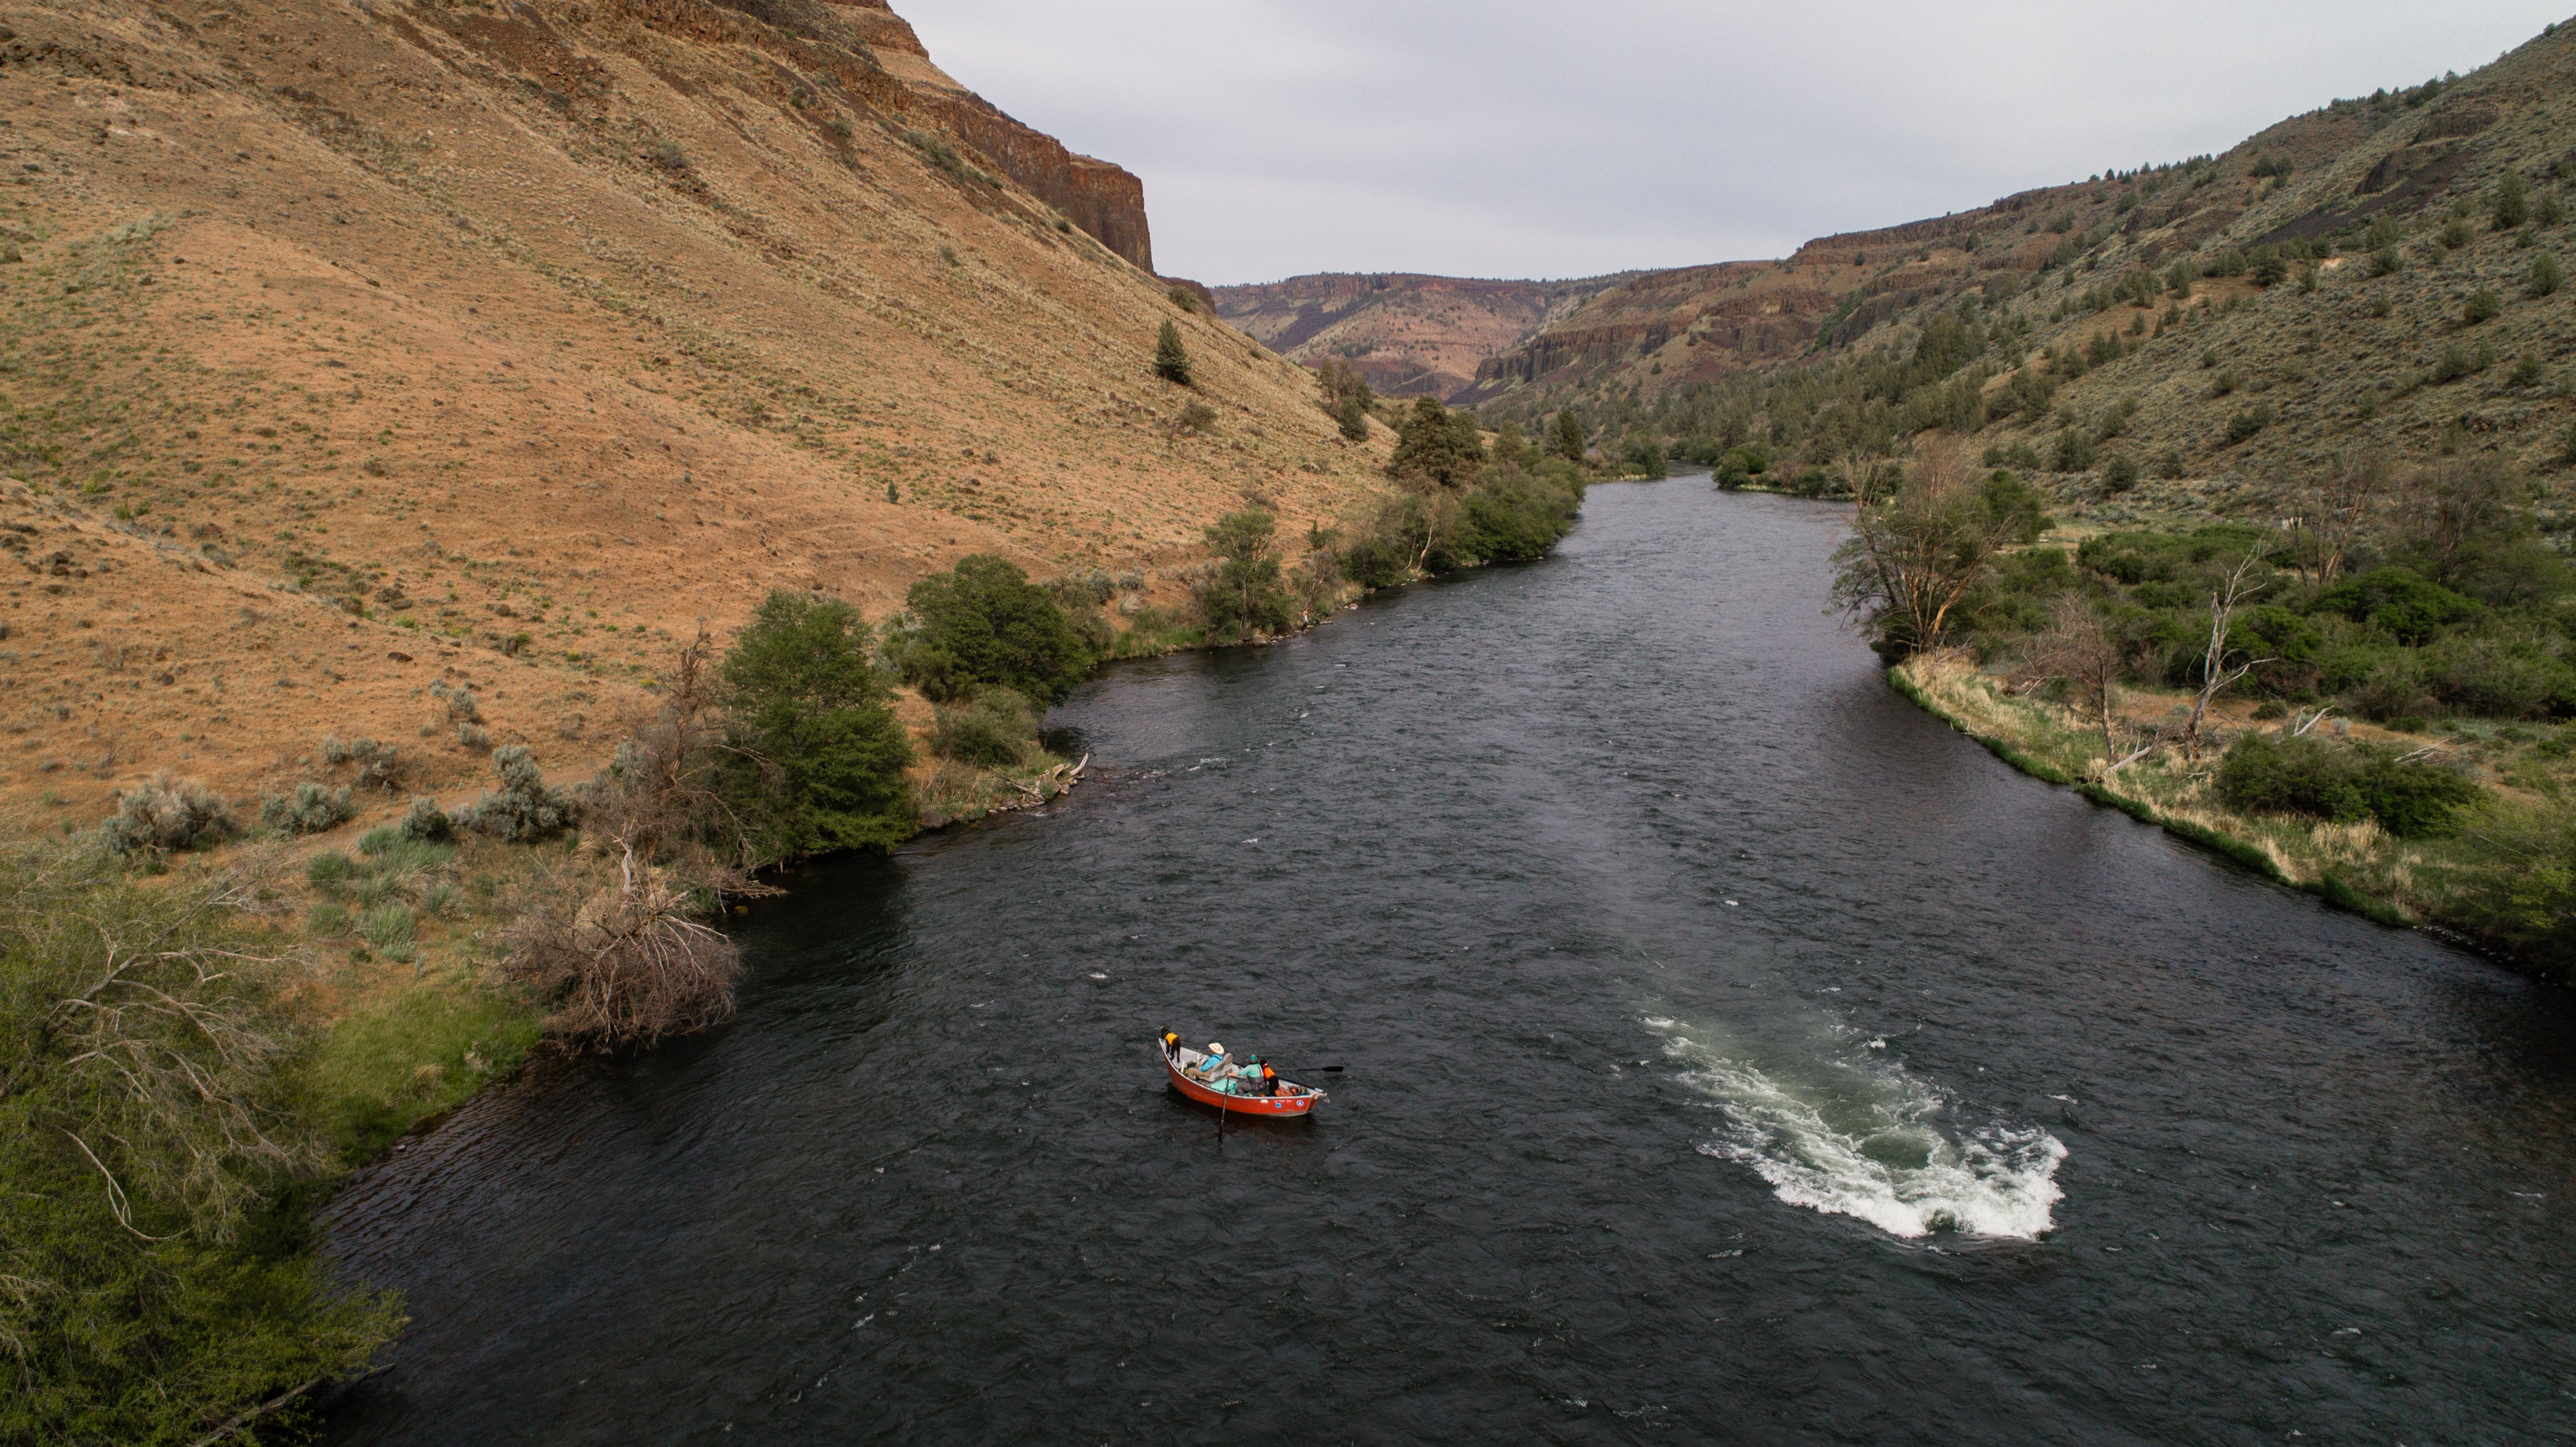 Fishing boat in the canyon of the deschutes.